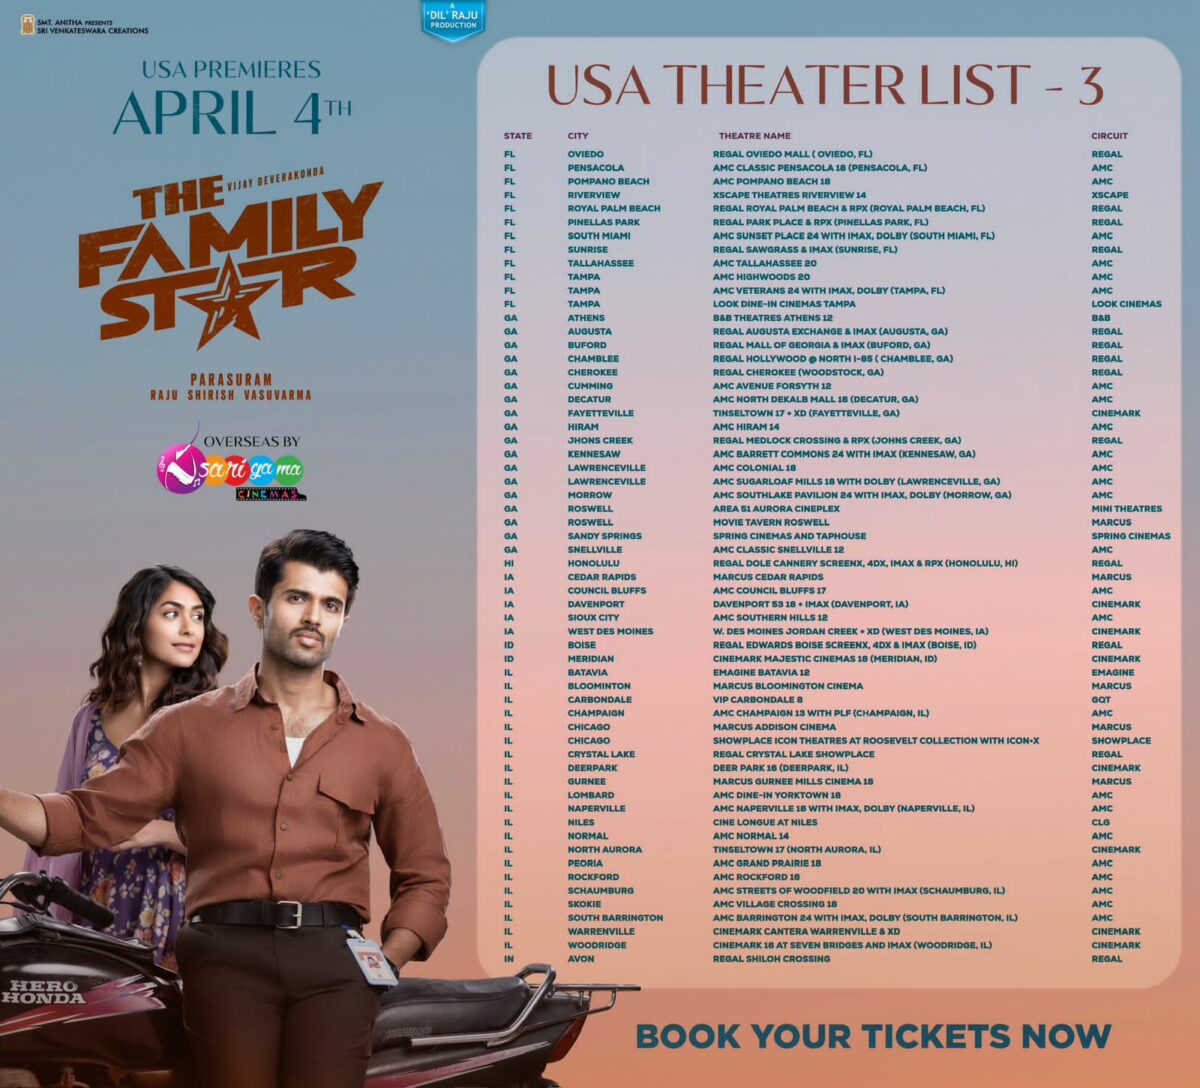 The Family Star Usa Premieres On April 4th, Theatres List Out